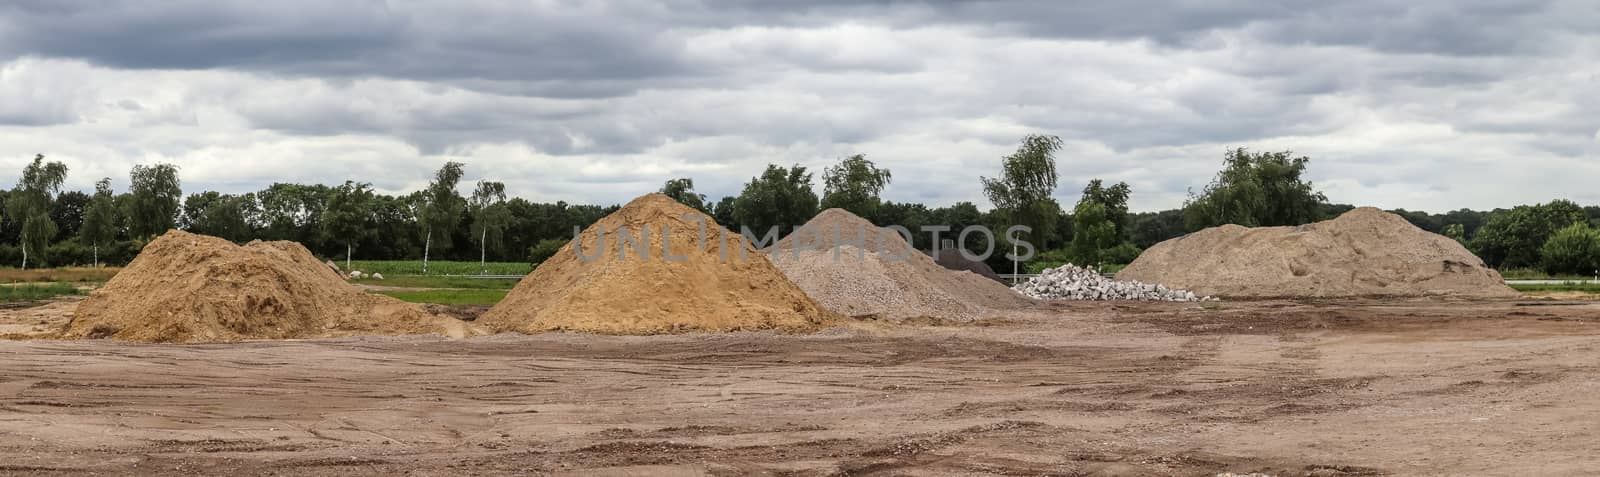 View into a gravel pit with piles of sand and tire tracks